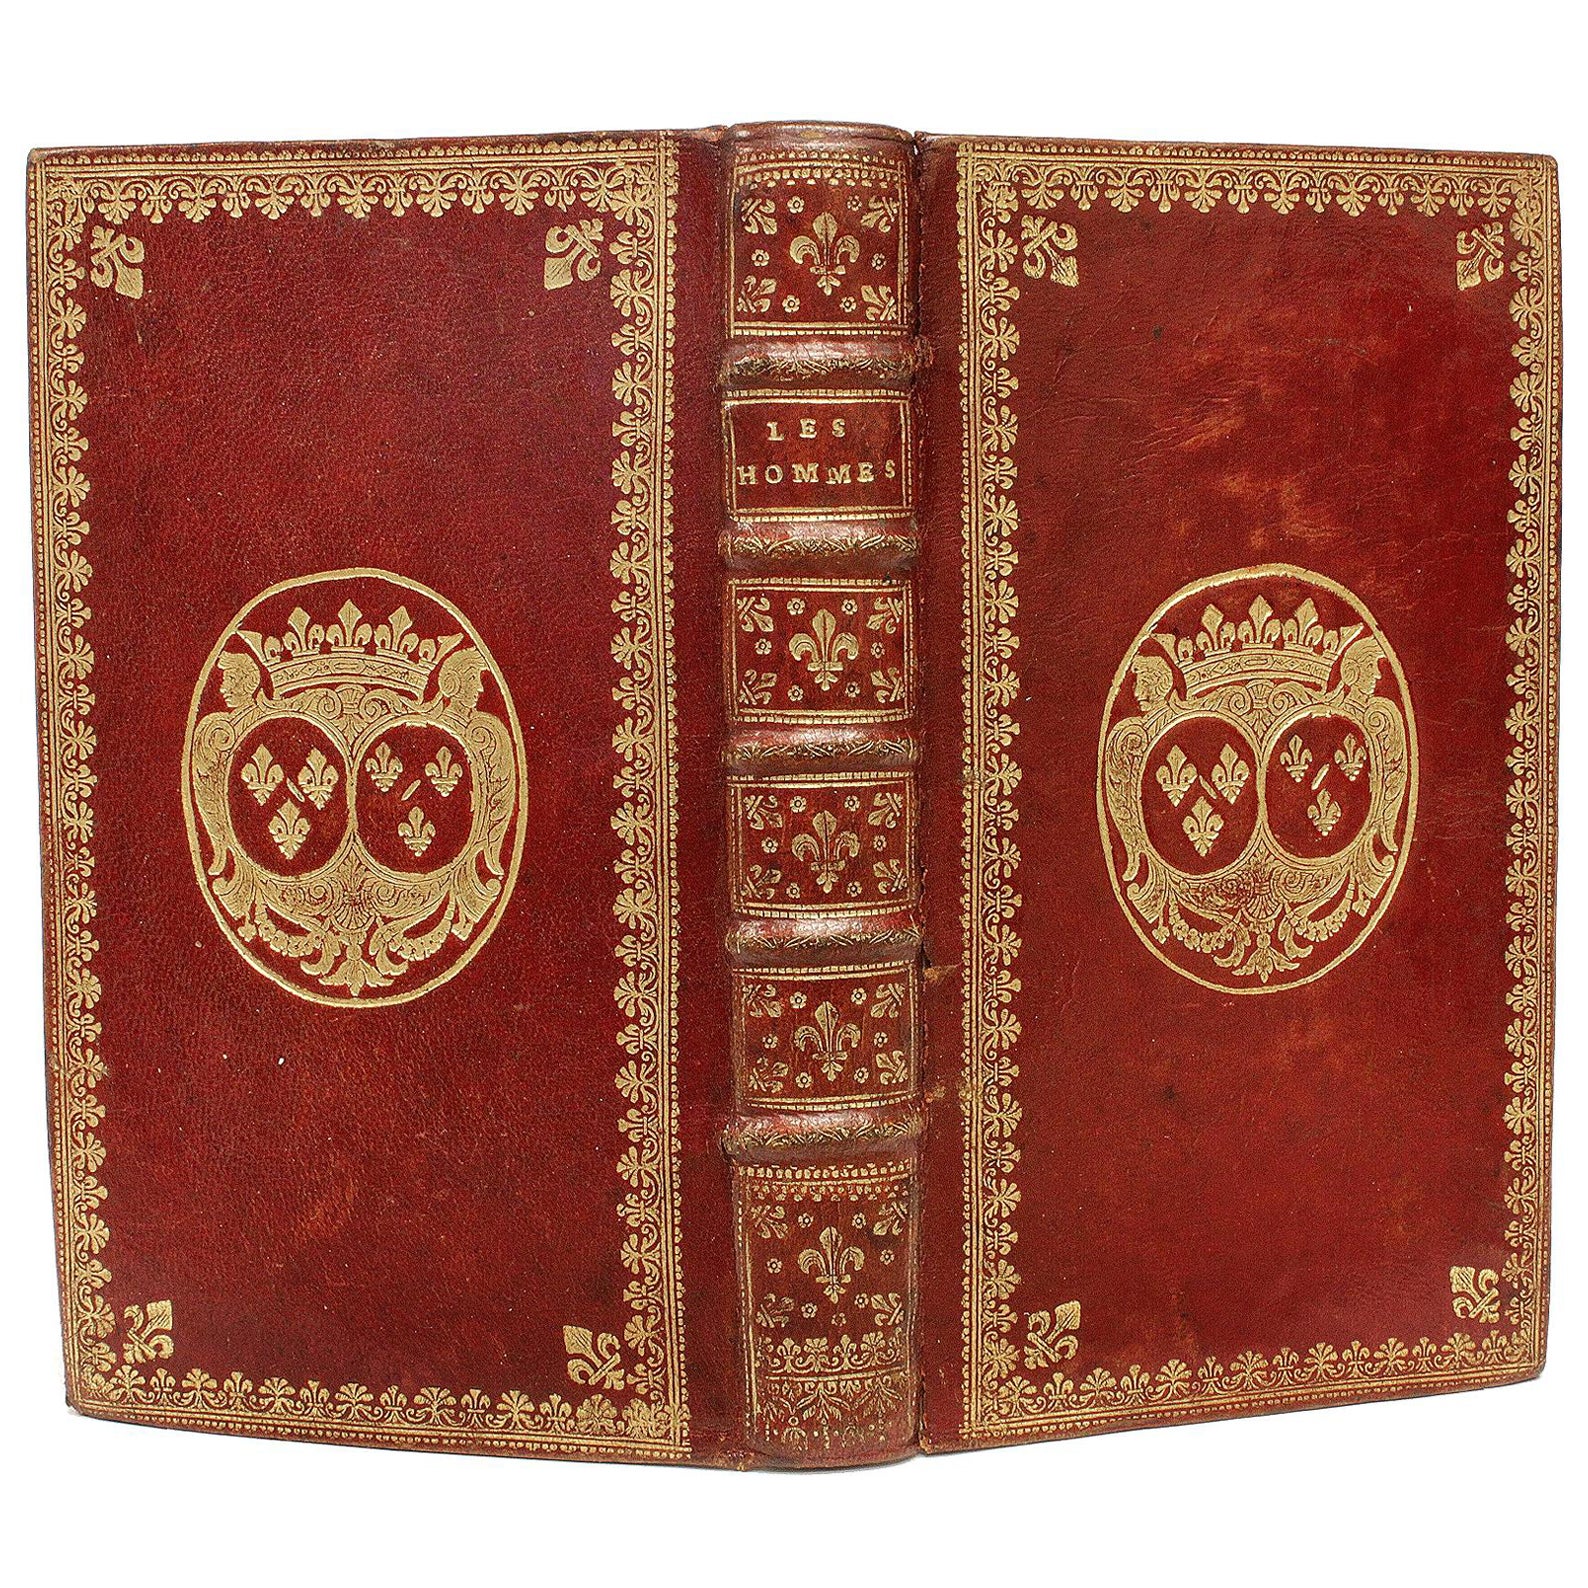 VARENNES. Les Hommes. 1712 - 1st ED - WITH THE GILT ARMS OF LOUIS XIV's DAUGHTER For Sale